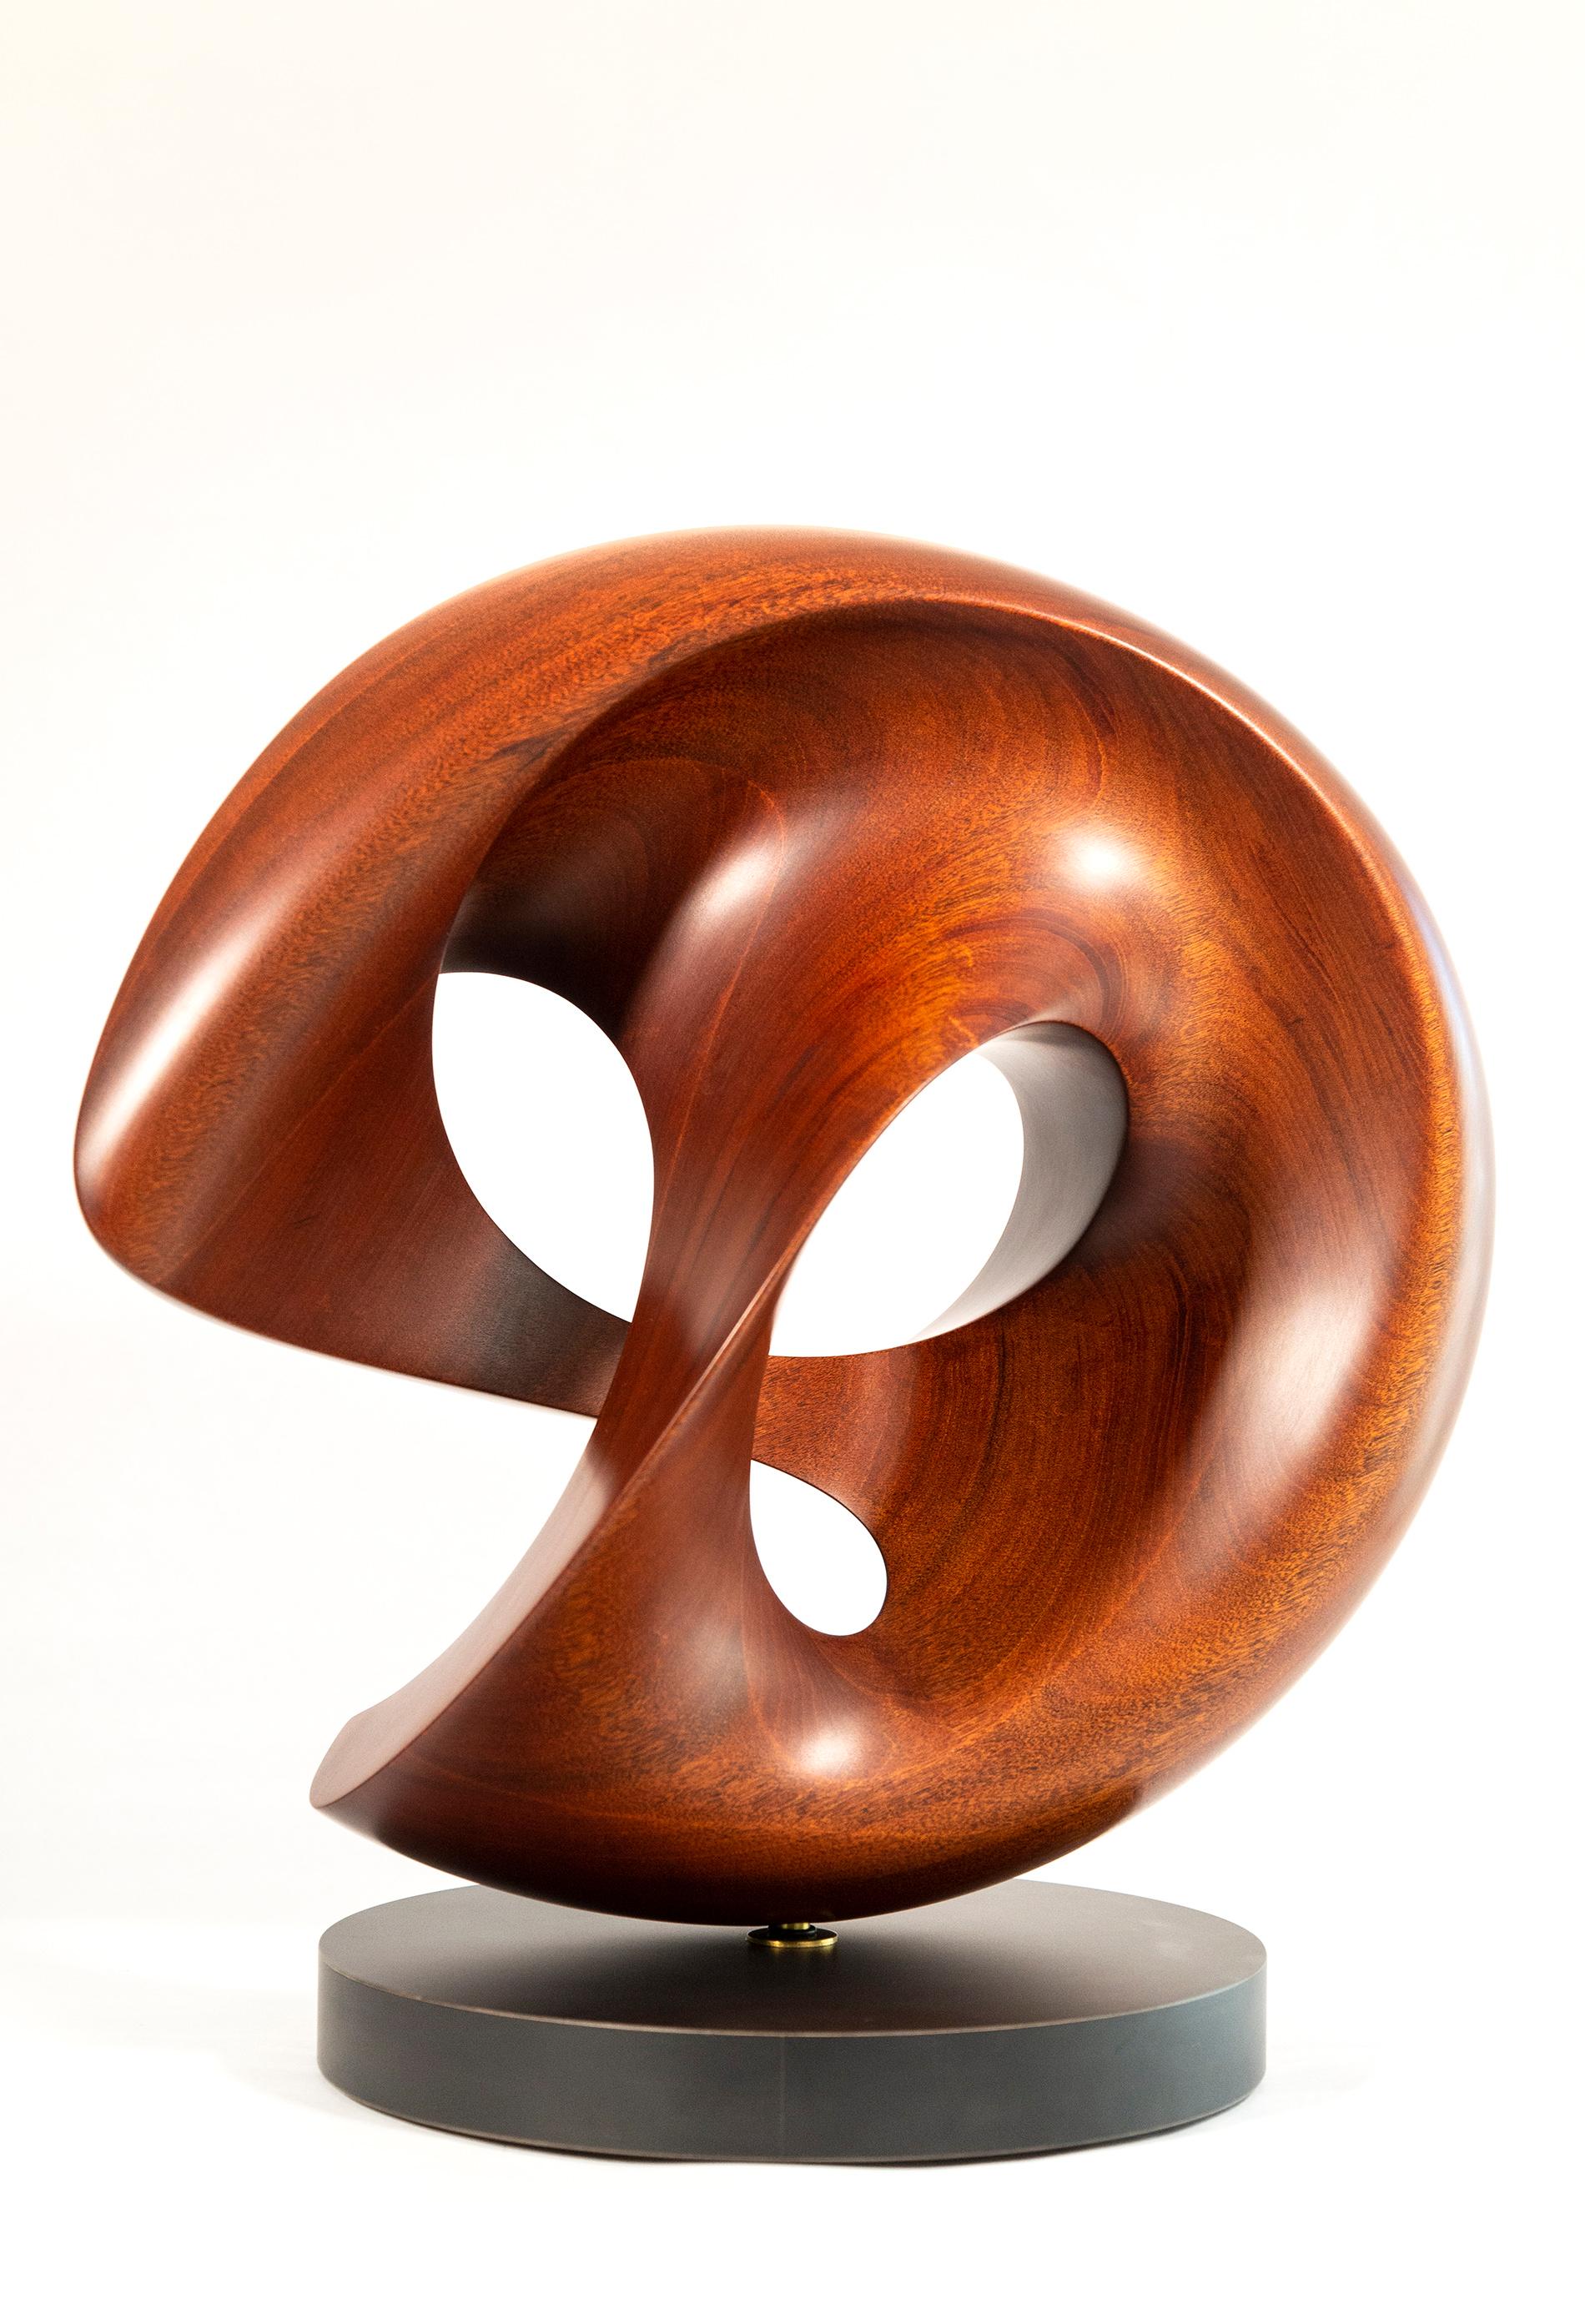 The elegant, lyrical curves of this abstract sculpture by David Chamberlain are hand-carved from one continuous loop of mahogany wood. The American artist is a sculptor, painter, jazz musician, a Capella singer, composer, writer and educator—a